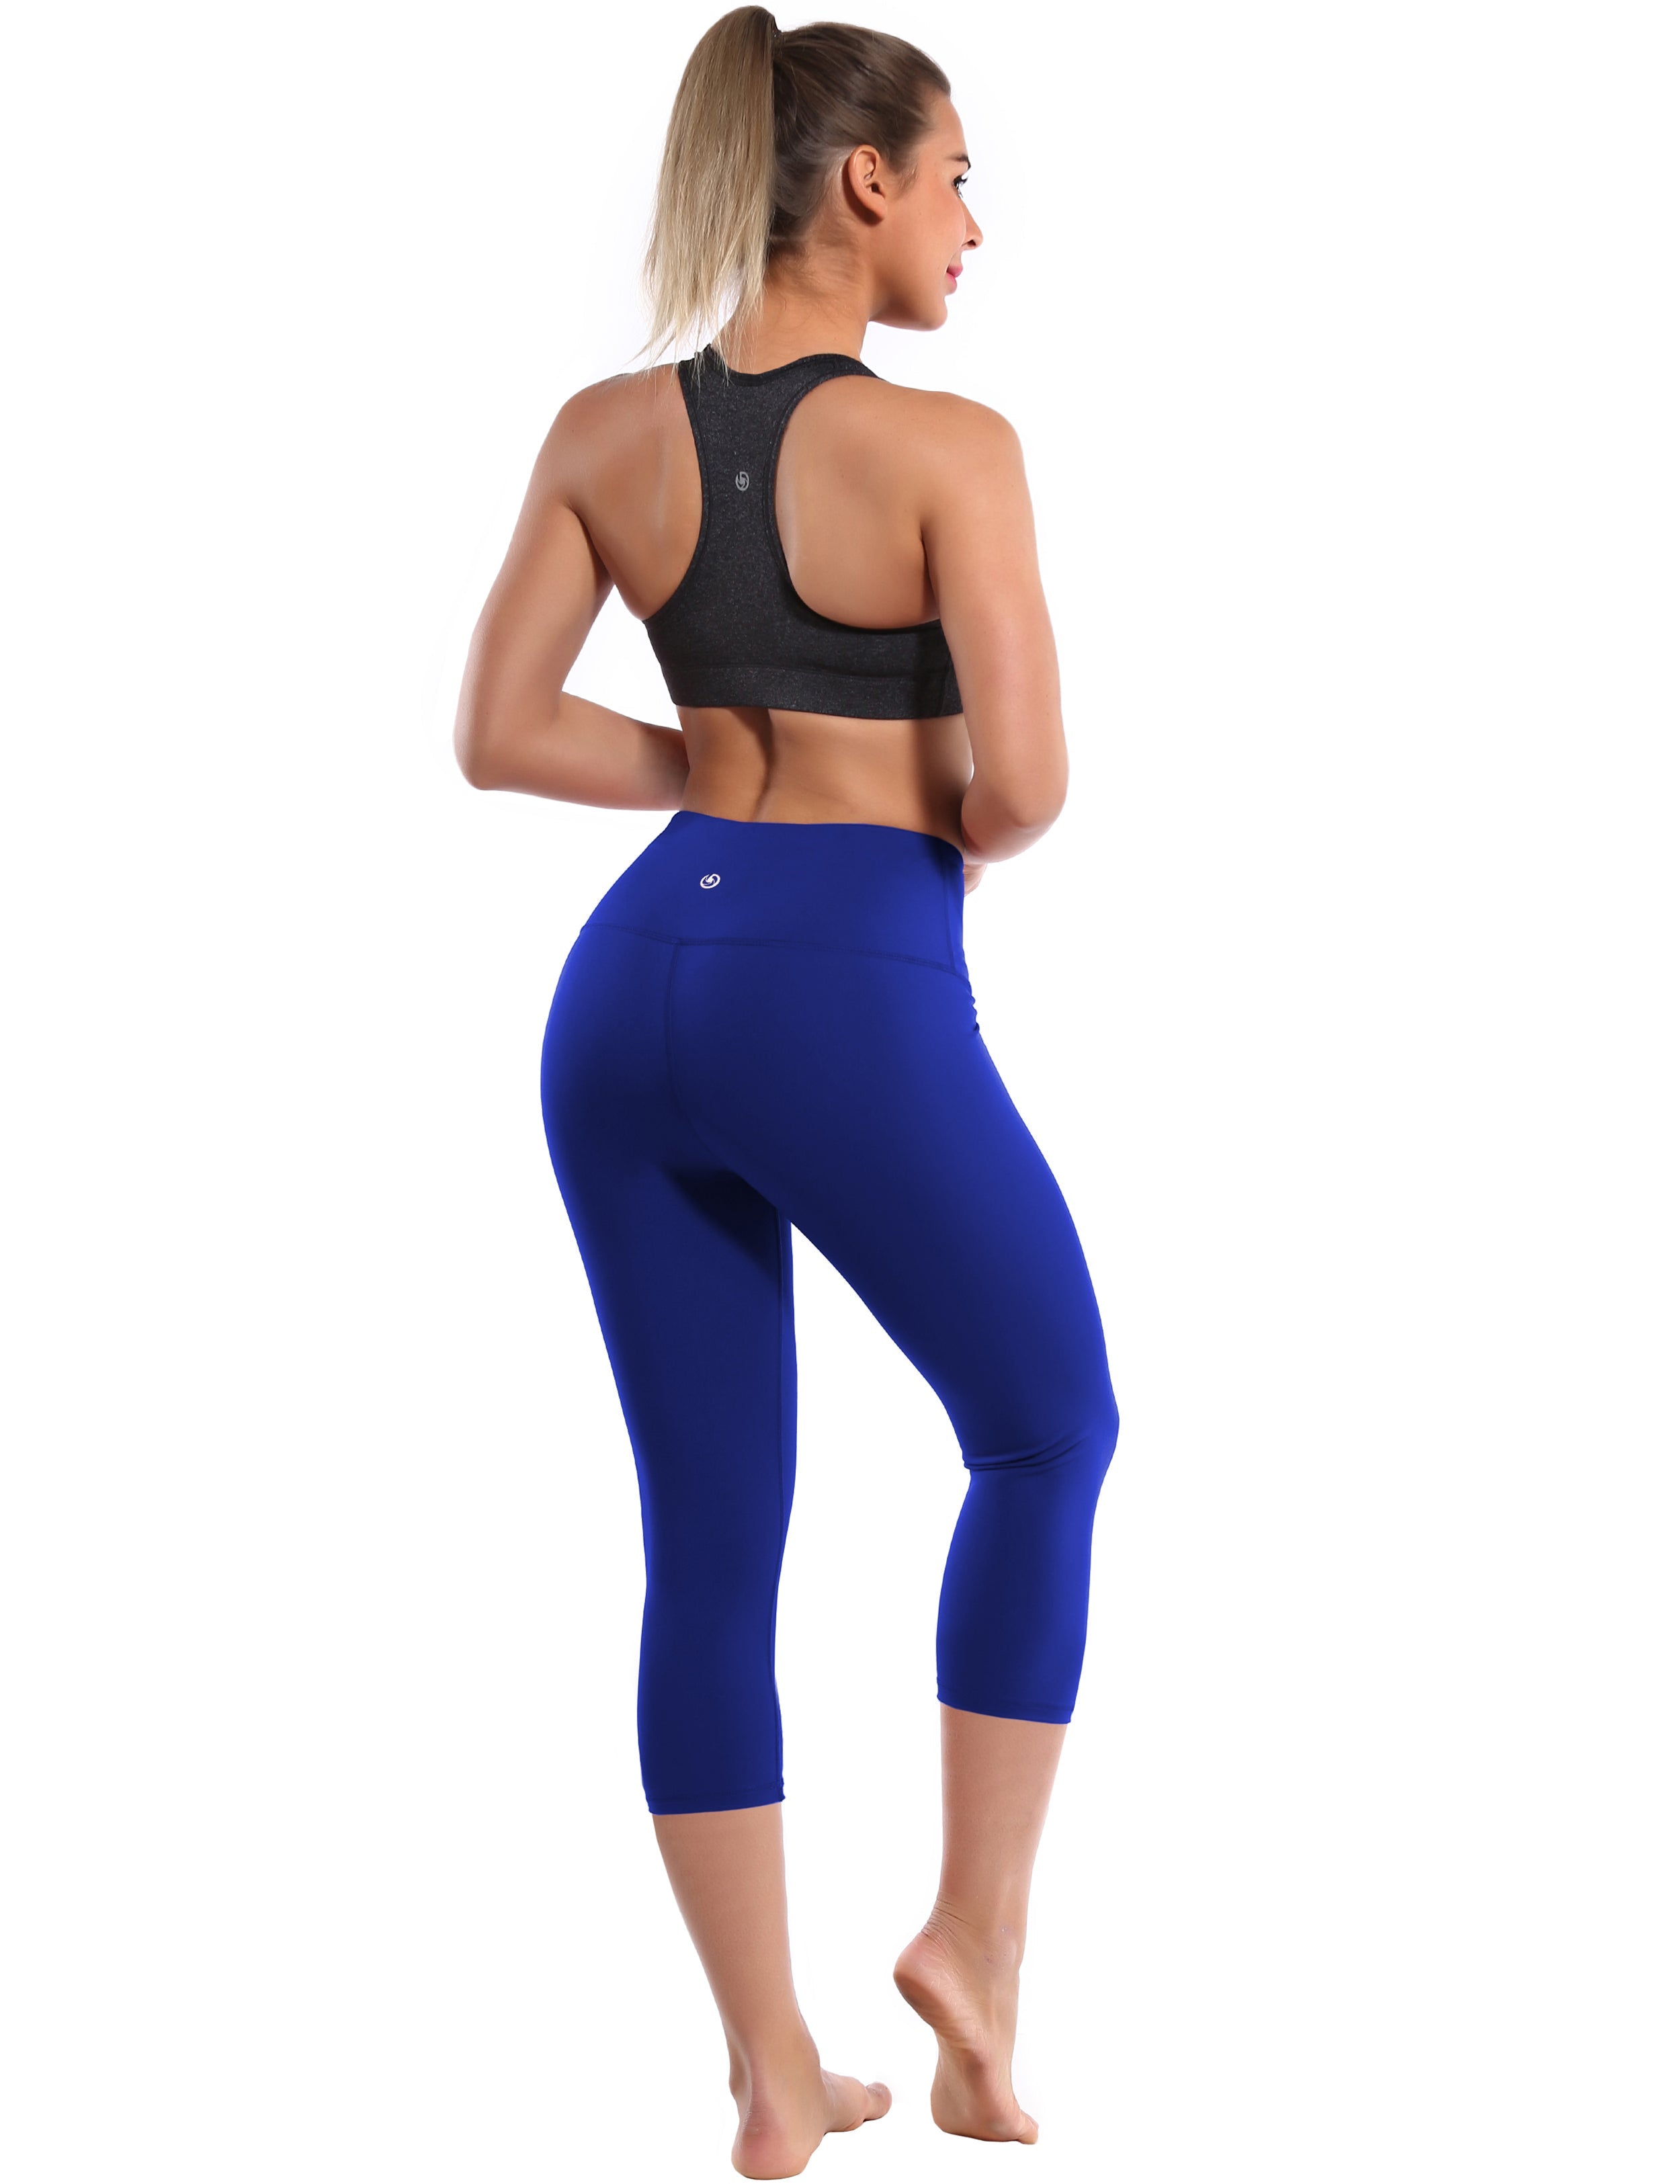 19" High Waist Crop Tight Capris navy 75%Nylon/25%Spandex Fabric doesn't attract lint easily 4-way stretch No see-through Moisture-wicking Tummy control Inner pocket